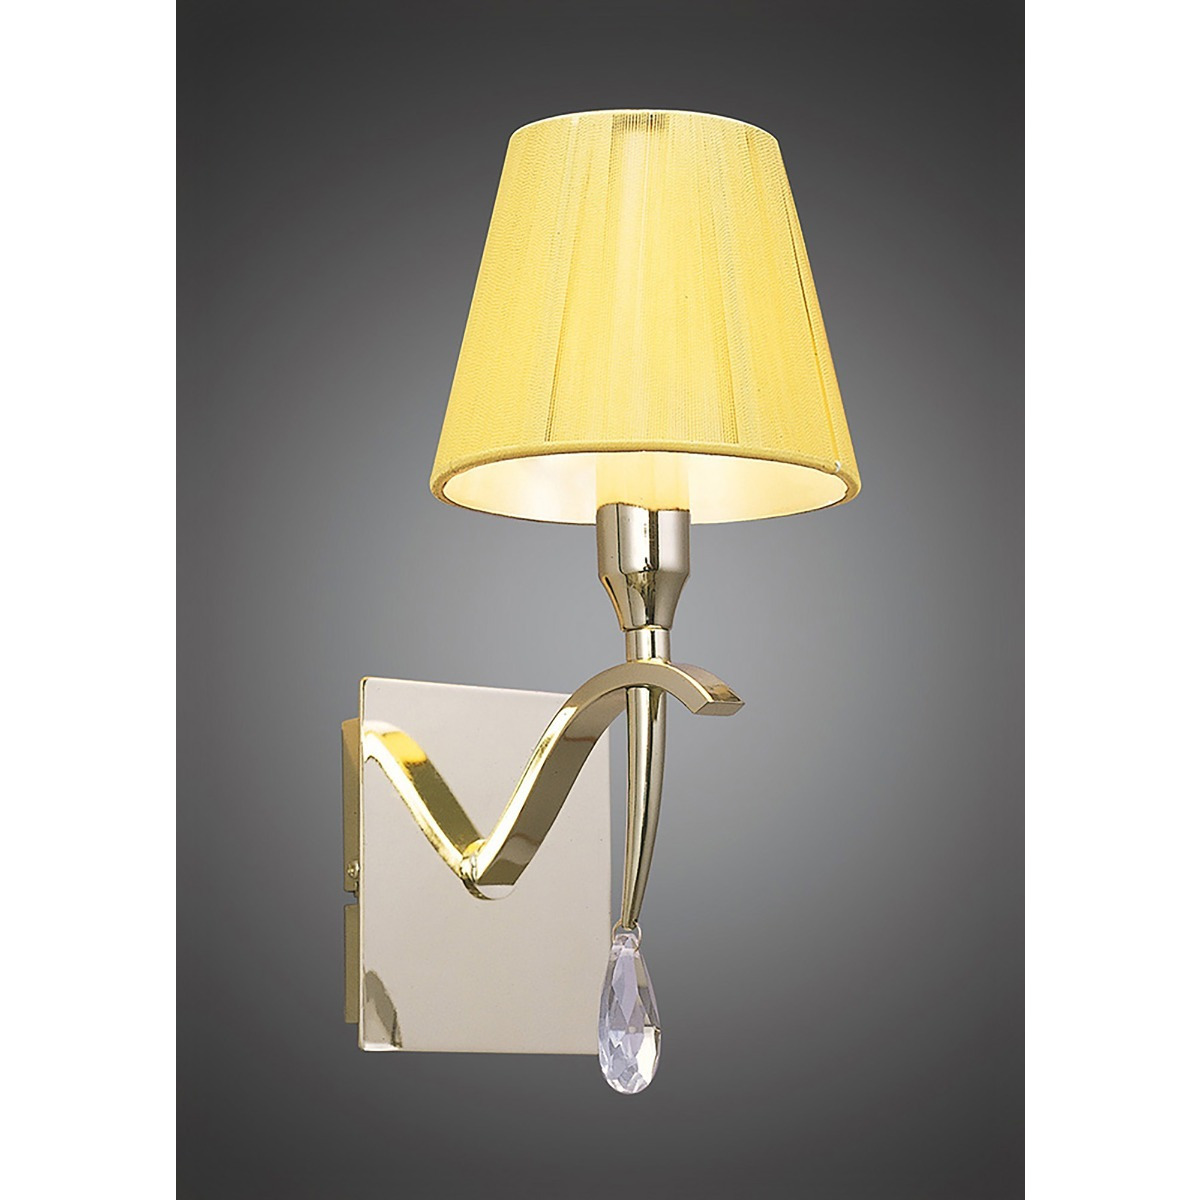 M0347PB/S Siena Polished Brass 1 Lt Switched Wall Lamp With Shades